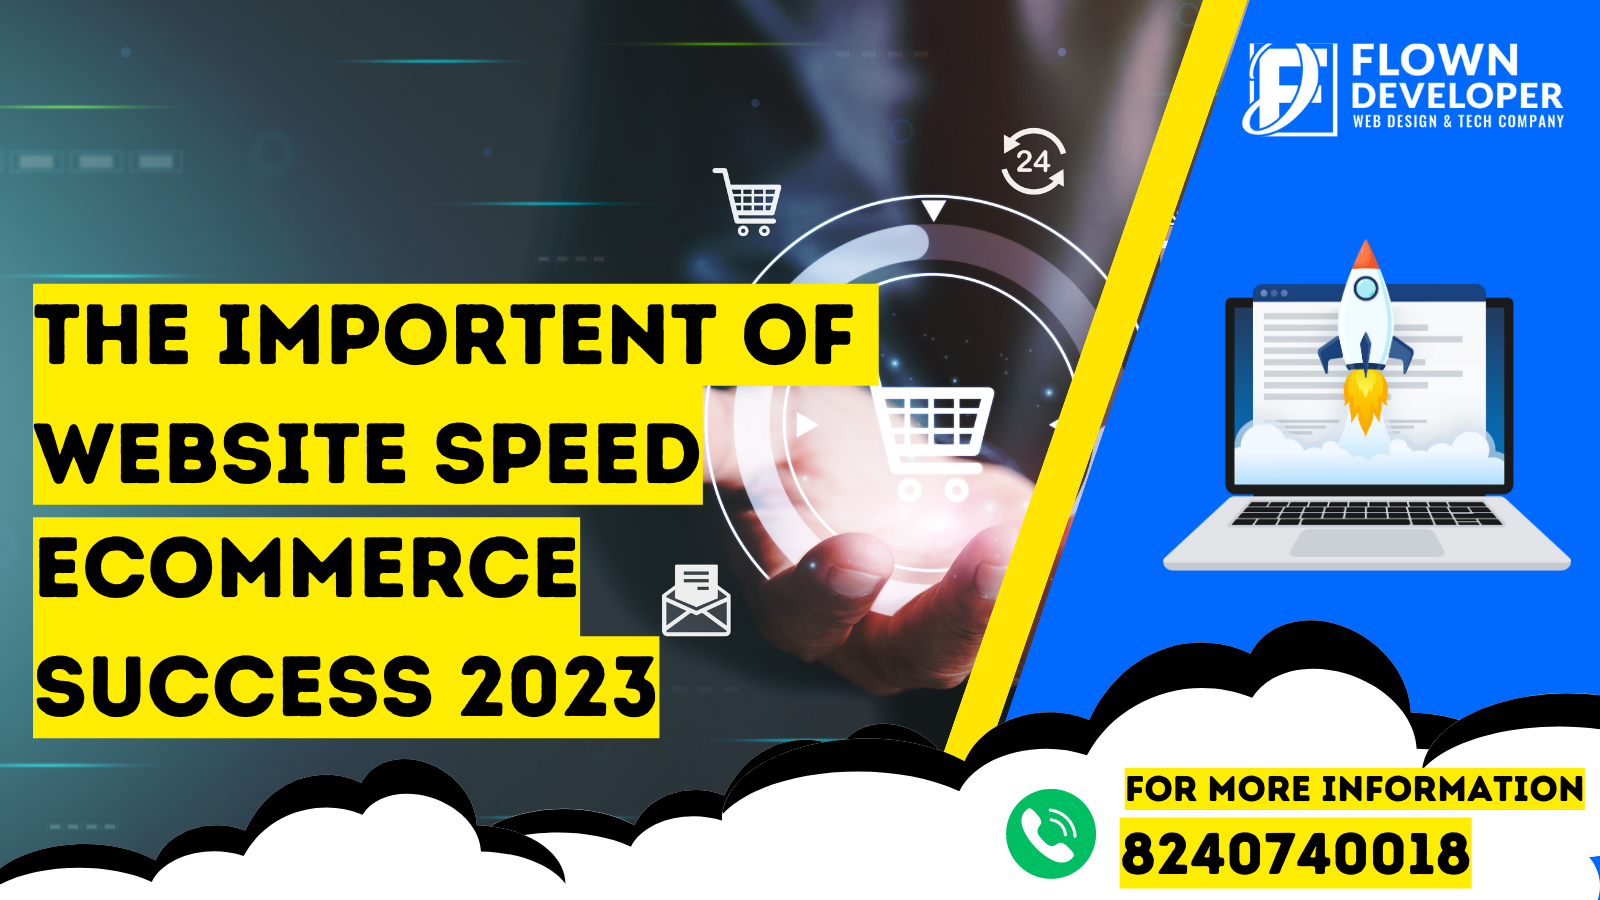 The impact of website speed on ecommerce success